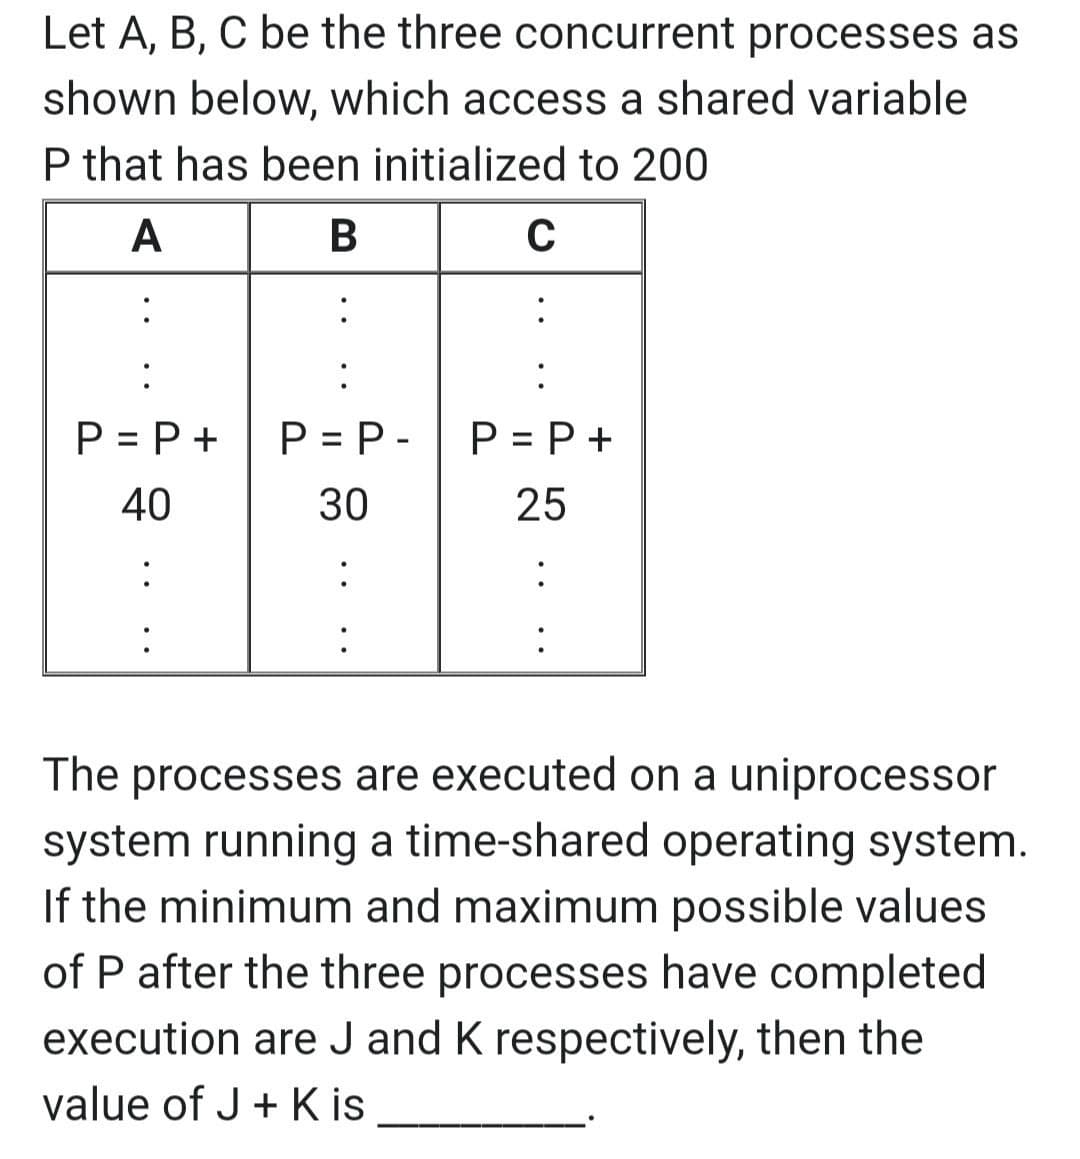 Let A, B, C be the three concurrent processes as
shown below, which access a shared variable
P that has been initialized to 200
A
:
:
P = P +
P = P -
P = P +
40
30
25
:
:
:
:
:
The processes are executed on a uniprocessor
system running a time-shared operating system.
If the minimum and maximum possible values
of P after the three processes have completed
execution are J and K respectively, then the
value of J + K is
